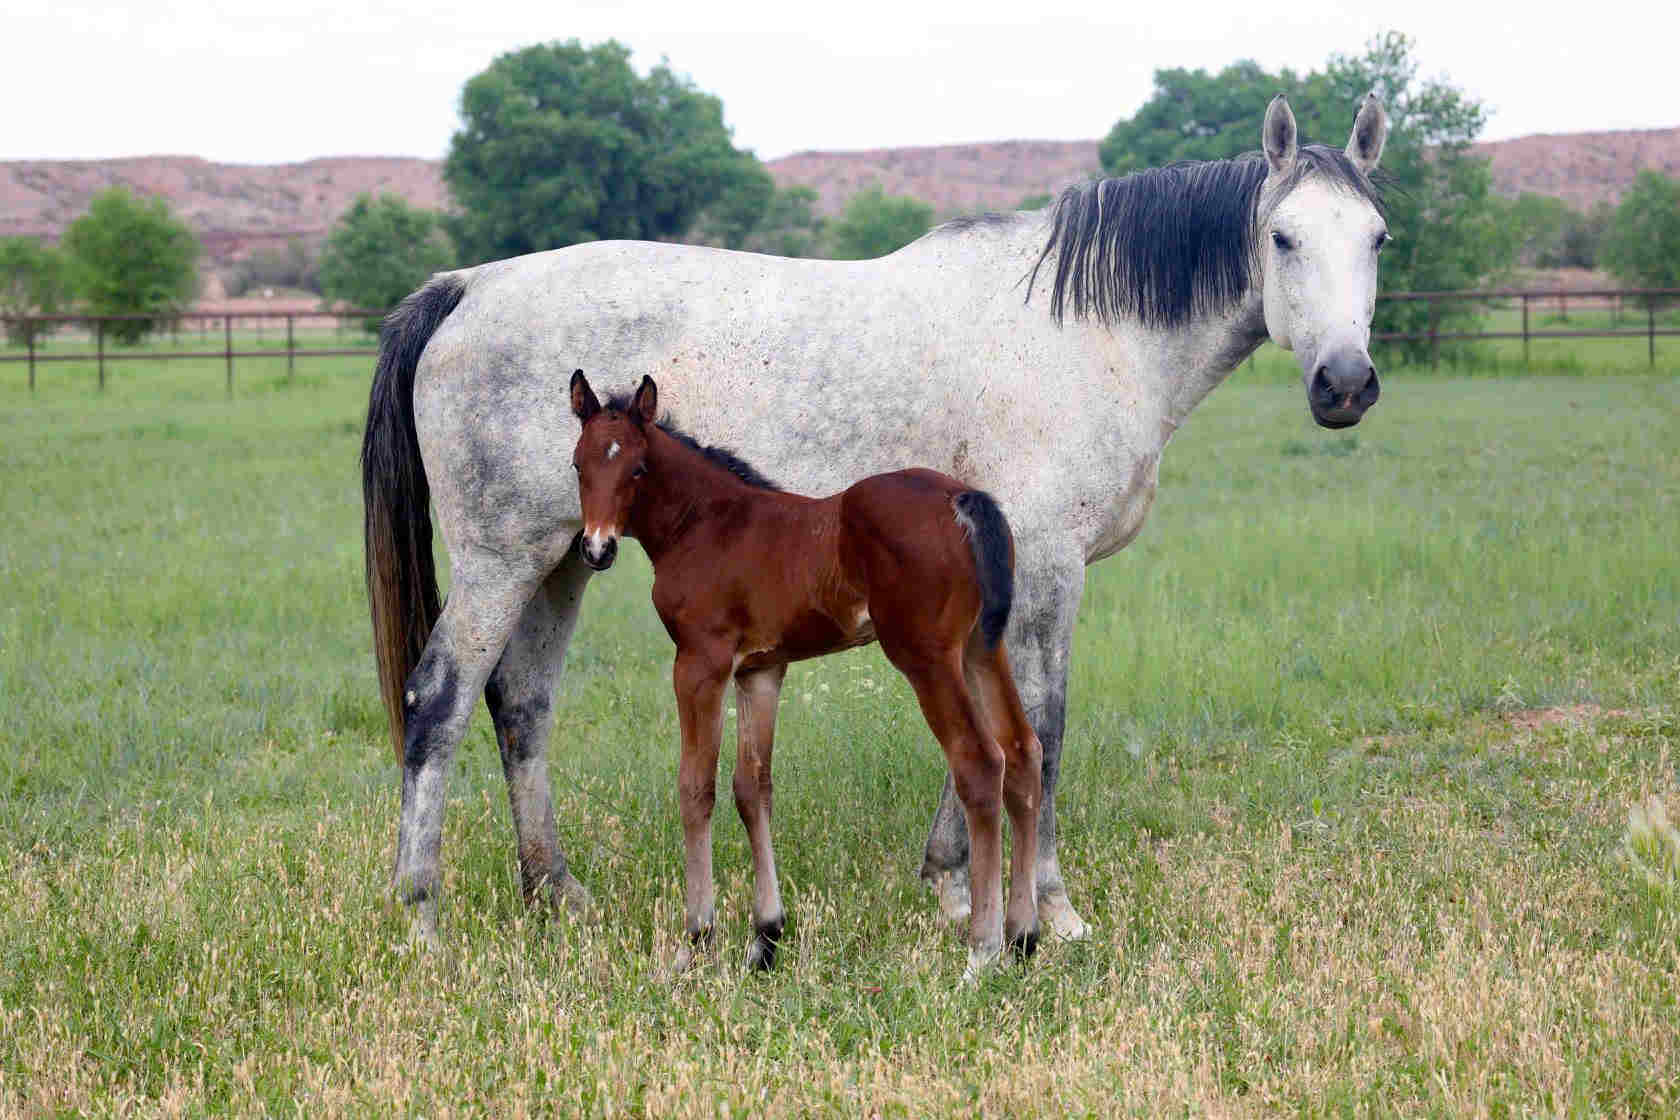 zooey b brood mare with colt at rancho corazon 1